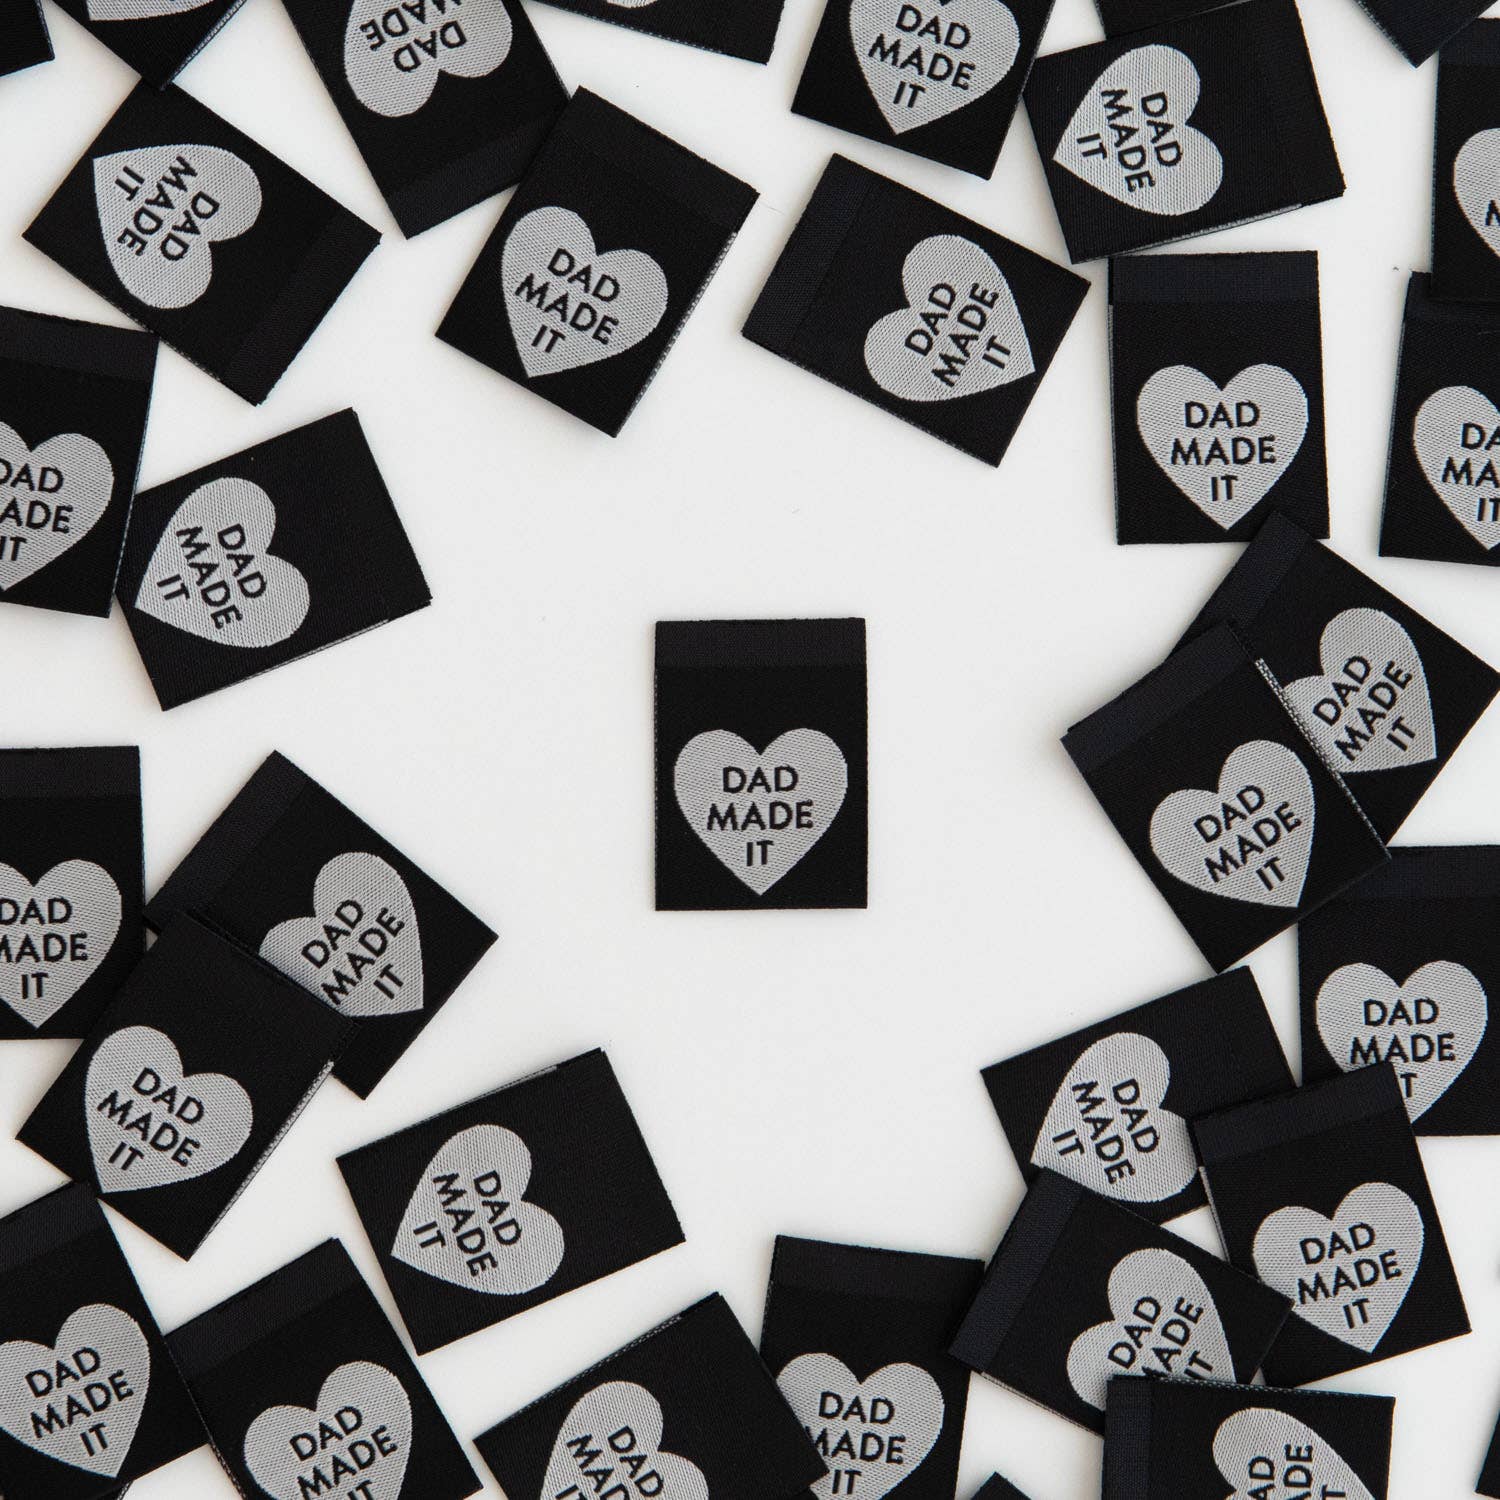 Dad Made It Heart Woven Labels - Sewing Woven Clothing Tags - homesewn